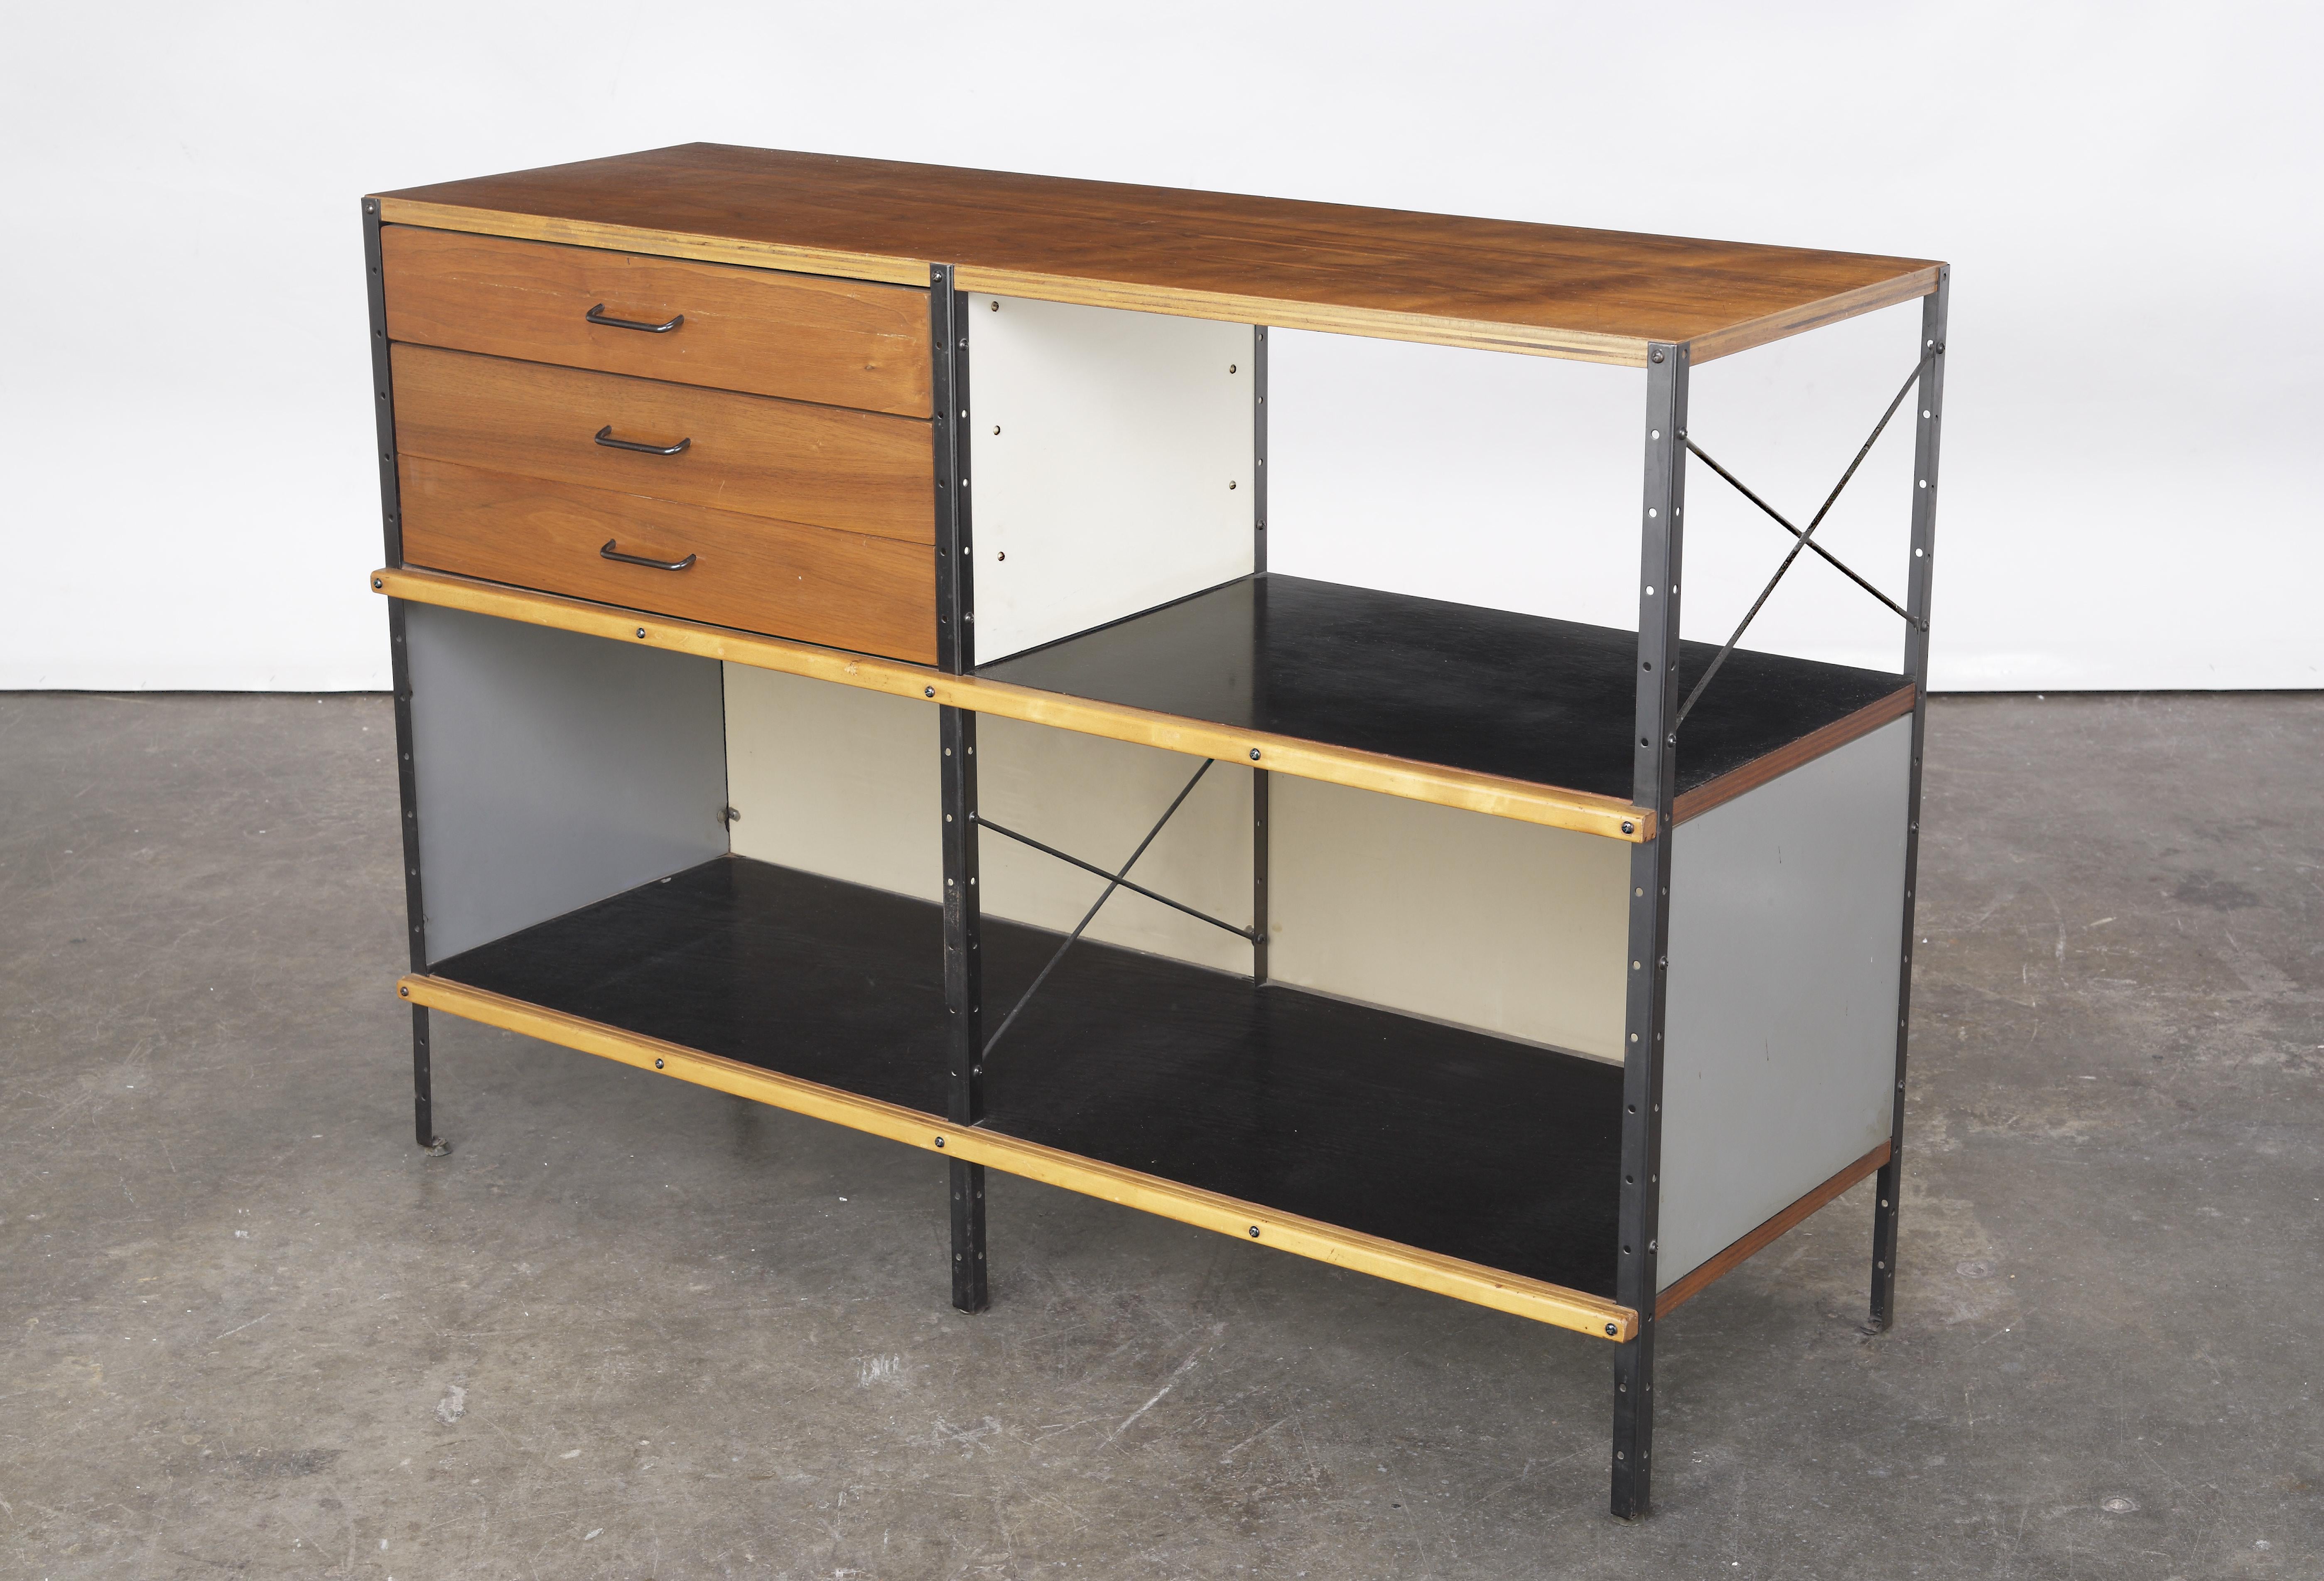 Rare Eames Storage Unit / Cabinet ESU 210, produced by Herman Miller, USA, 1950s. Birch plywood, lacquered masonite, laminate, zinc-plated steel. Herman Miller manufacturer's tag in top drawer. Good vintage condition. Ships worldwide, please contact